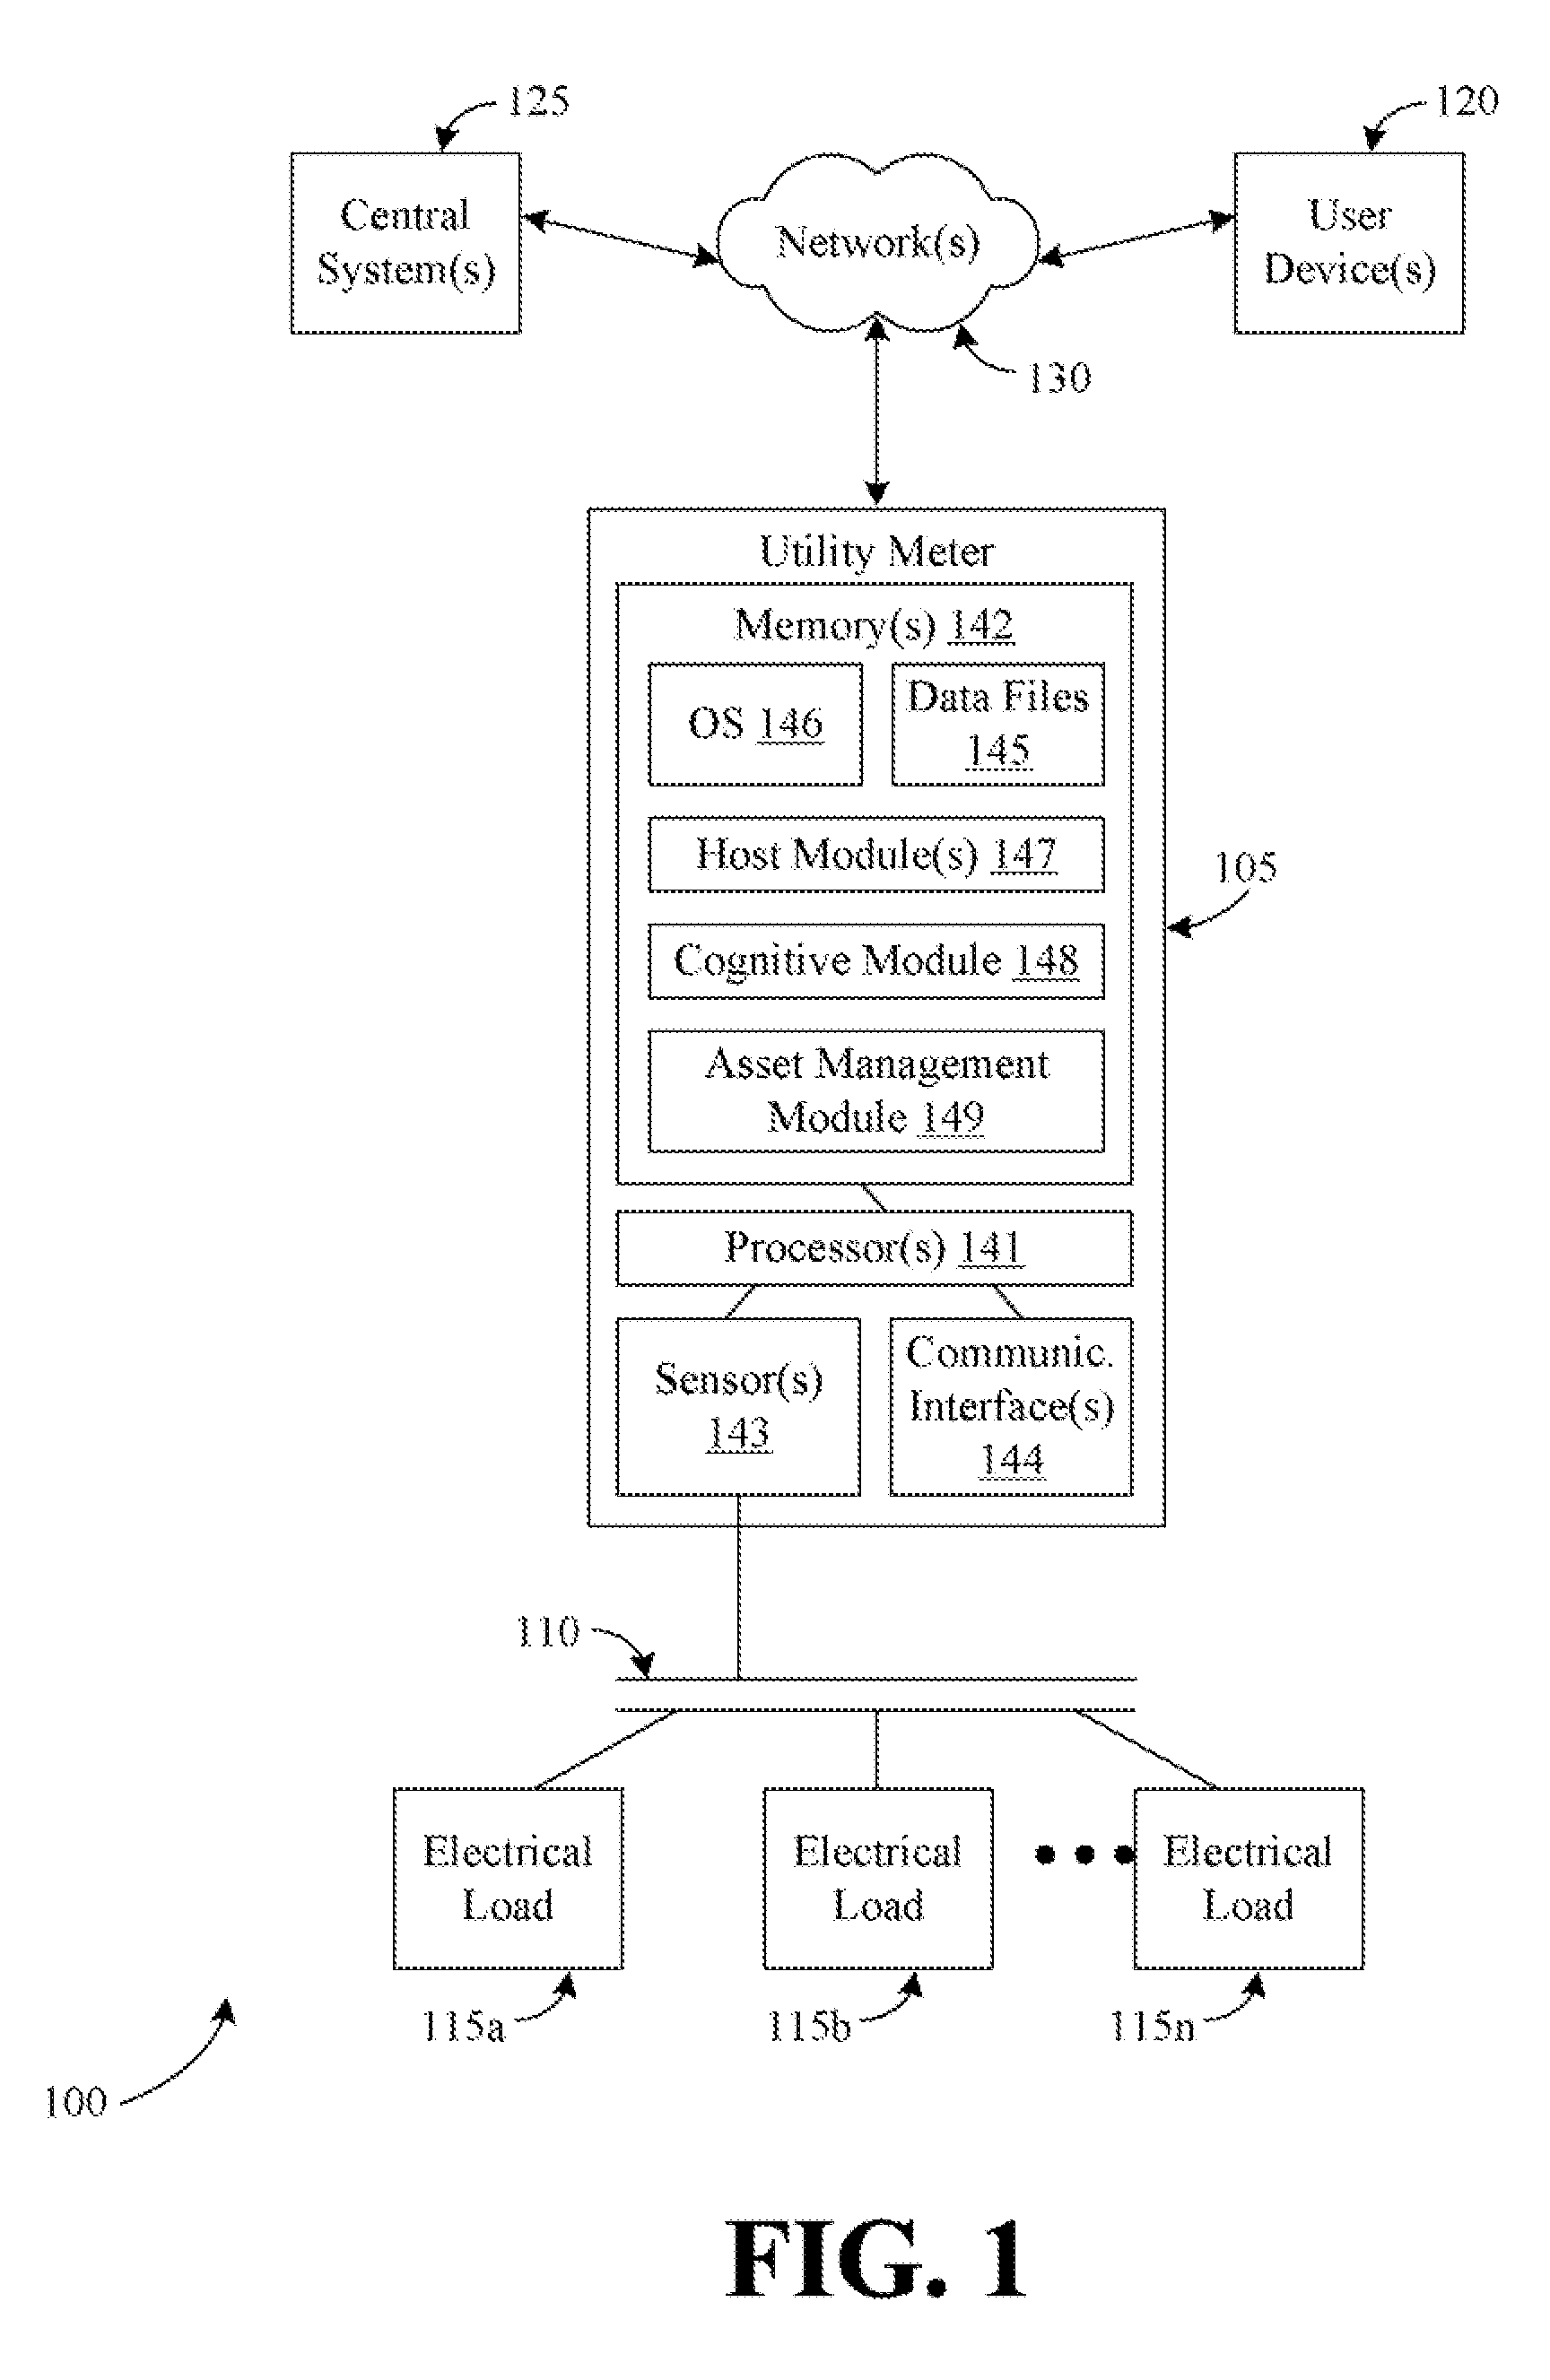 Systems, methods, and apparatus for evaluating load power consumption utilizing a power meter